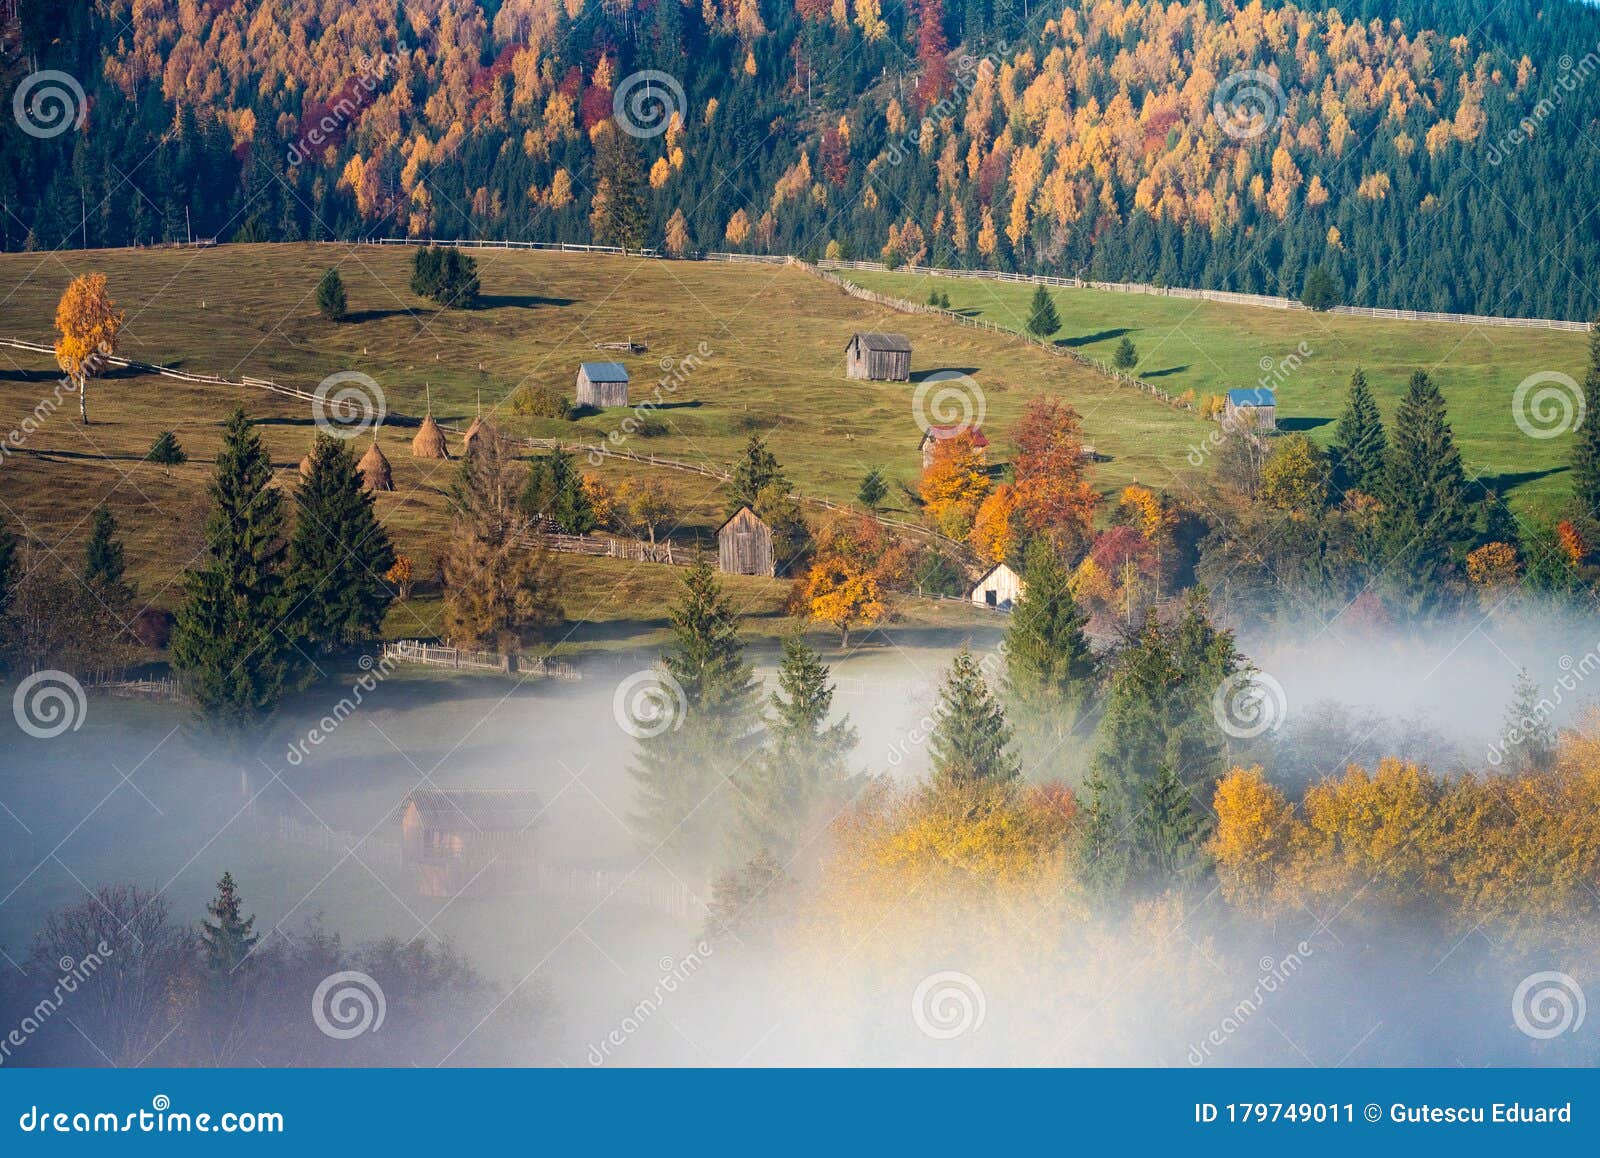 Autumn Morning in the Mountain of Transylvania, Nature Travel the Country Side of Romania Stock Image - Image of mountain, cycle: 179749011